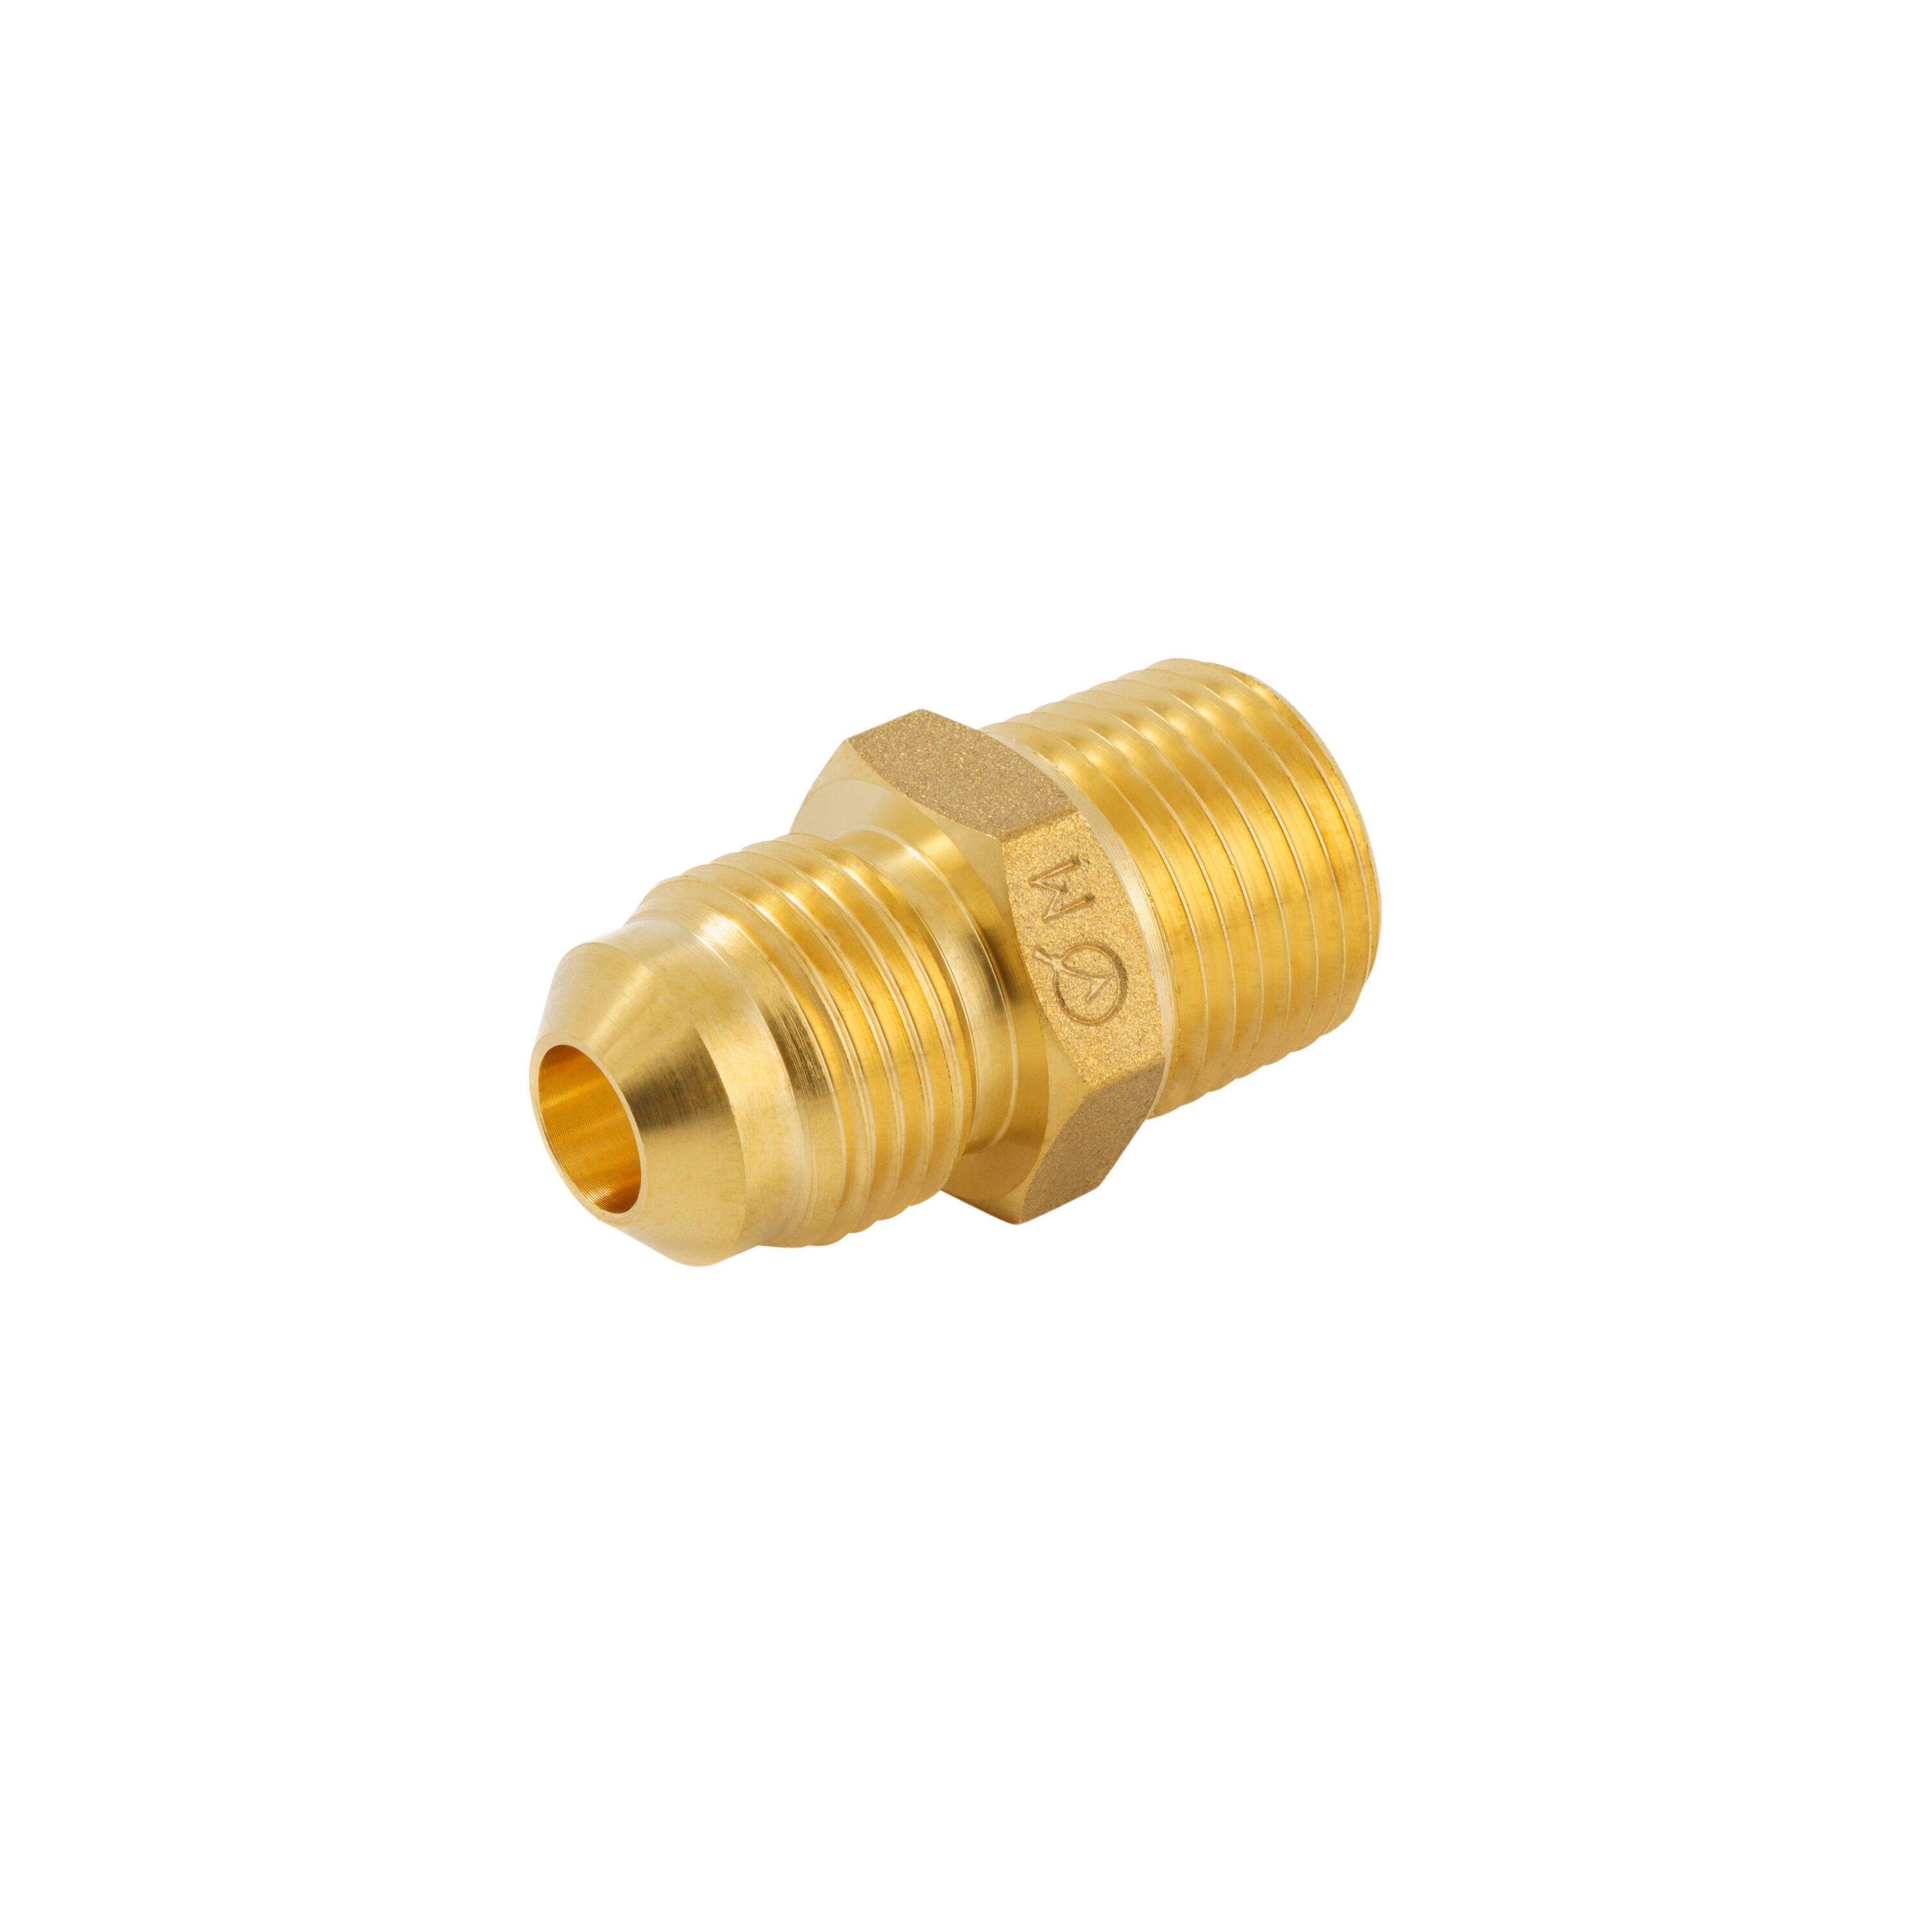 Proline Series 3/8-in x 3/8-in Threaded Union Fitting